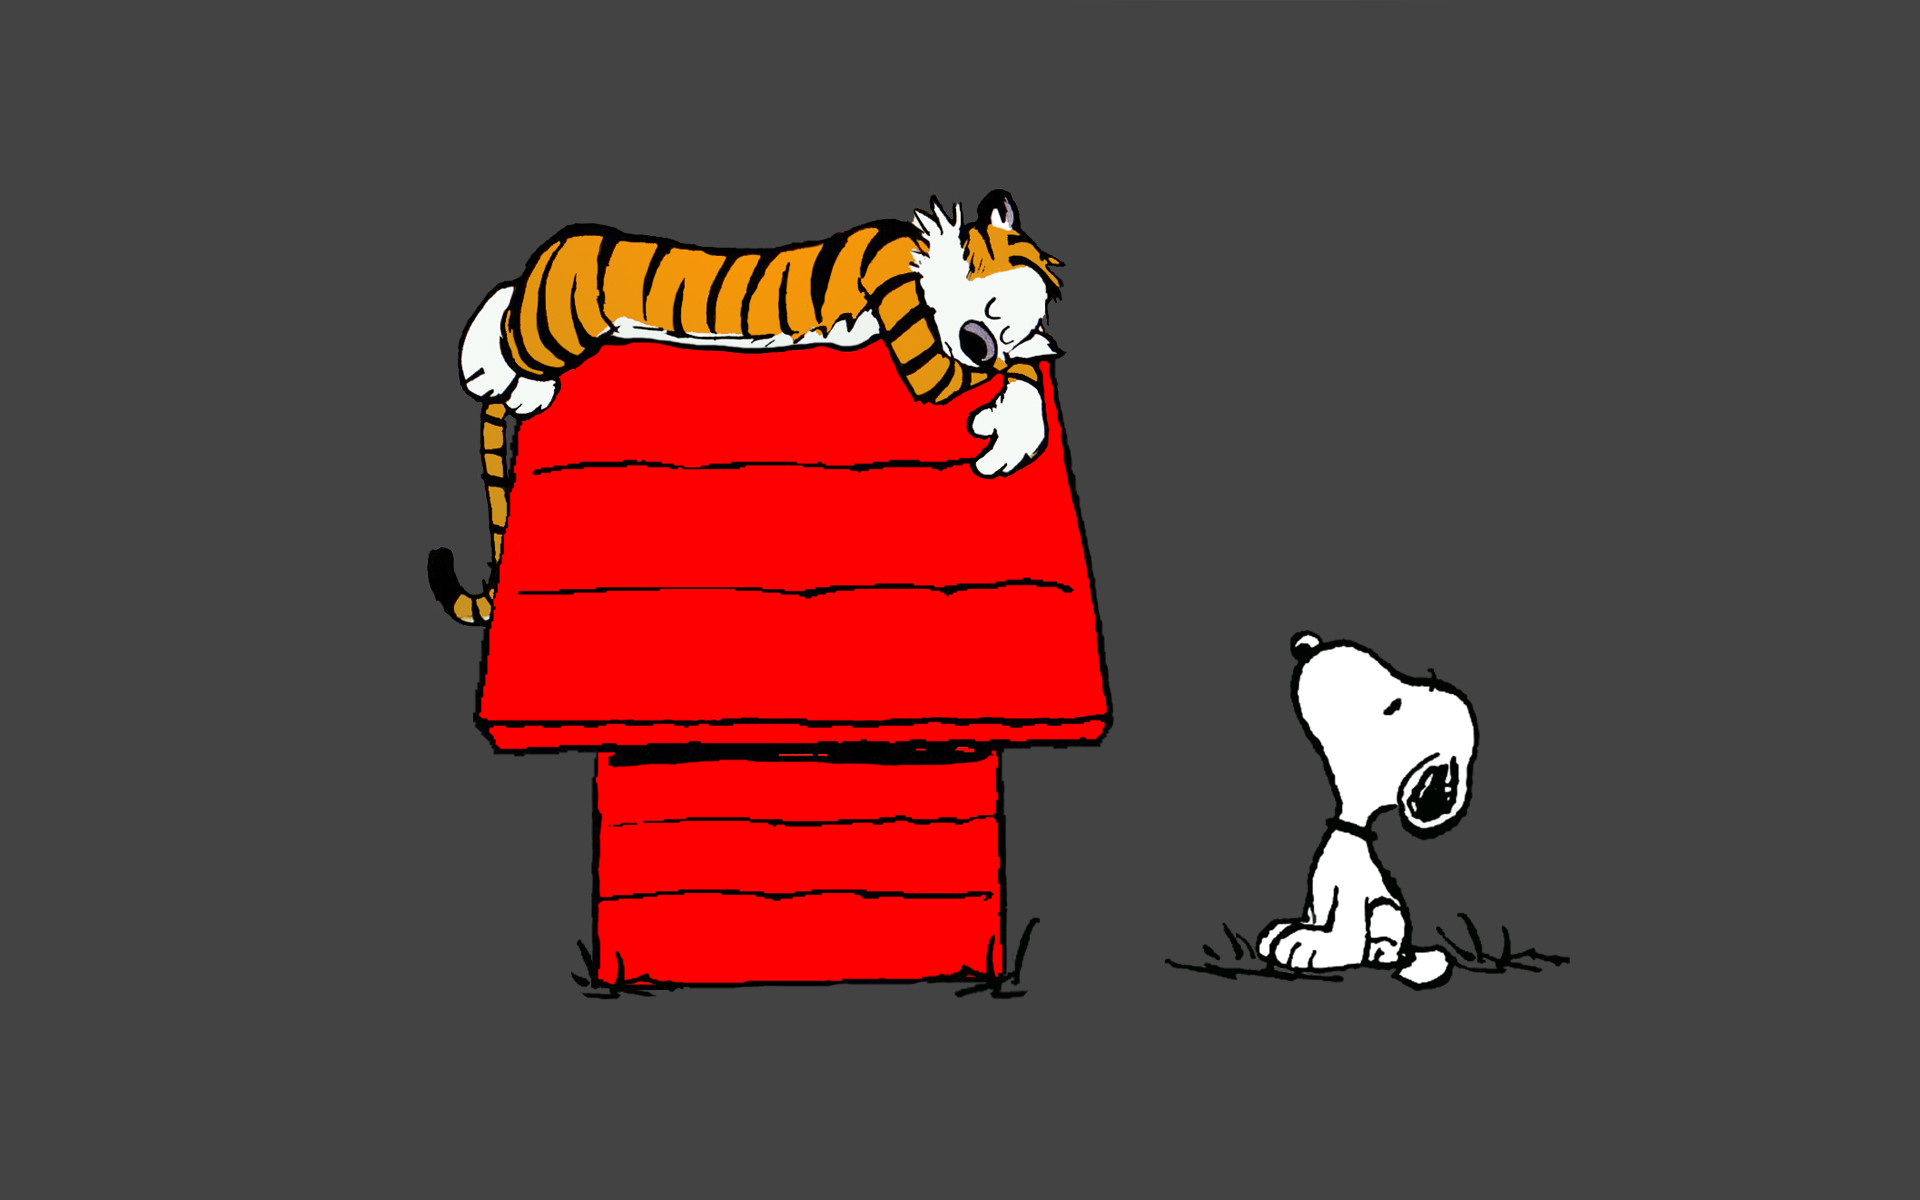 Free Download Calvin And Hobbes Snoopy Sleep Peanuts Tiger Wallpaper 19x10 19x10 For Your Desktop Mobile Tablet Explore 47 Calvin And Hobbes Hd Wallpaper Calvin And Hobbes Wallpapers Calvin